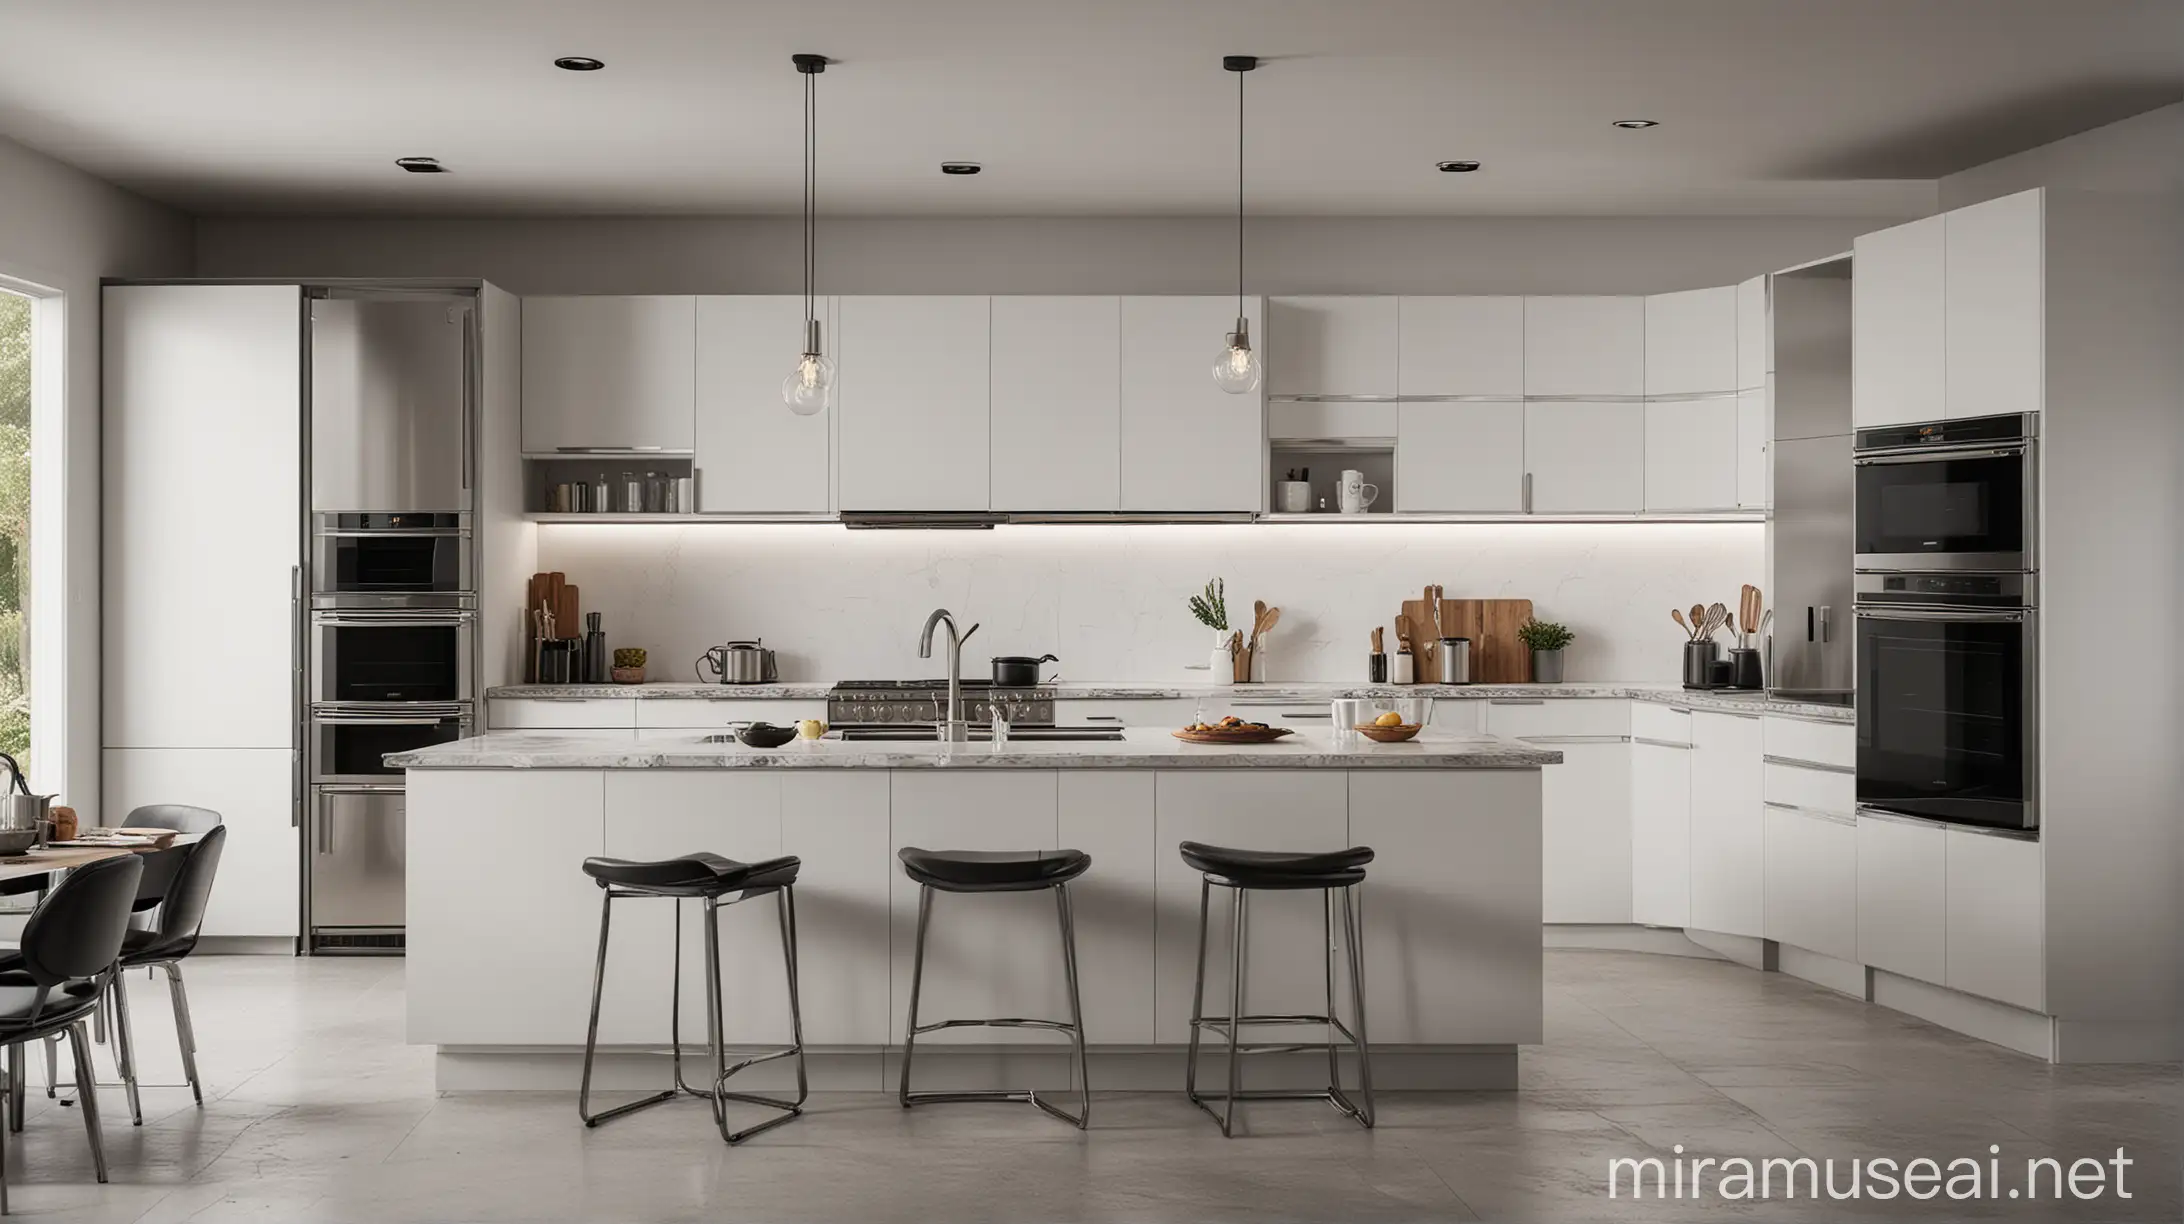 photorealistic image shot with Canon EOS R5, A wide-angle shot of a modern kitchen with sleek stainless steel appliances, quartz countertops, and minimalist cabinetry. The color palette is cool and crisp, with a dominant white background and accents of black and silver. The camera angle is slightly elevated, showcasing the spaciousness and functionality of the kitchen.